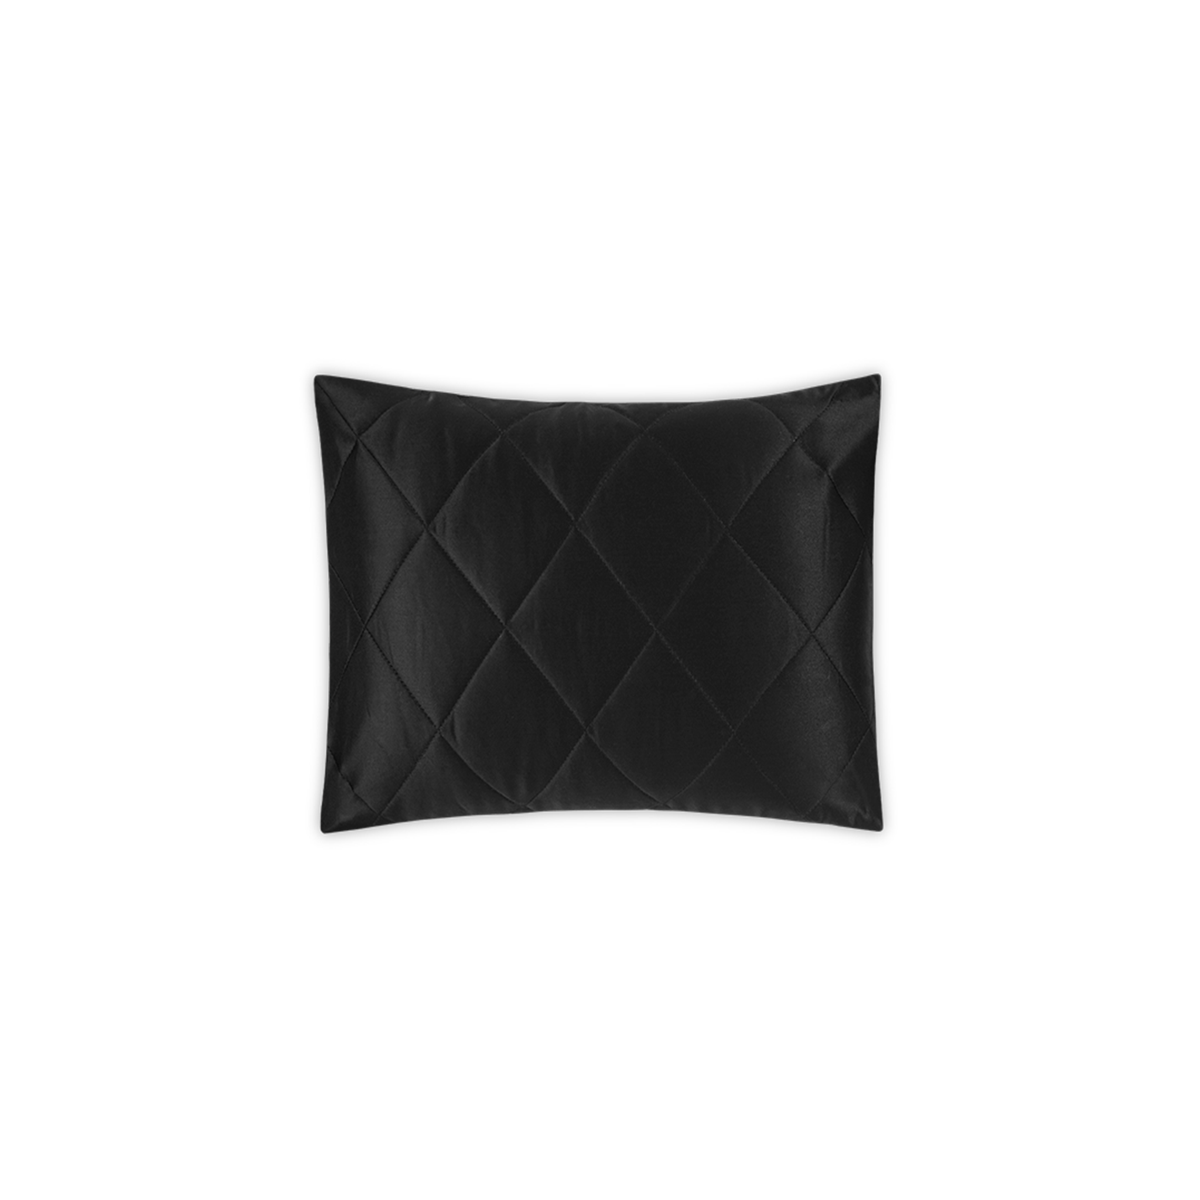 Silo Image of Matouk Nocturne Quilted Bedding Boudoir Sham in Black Color